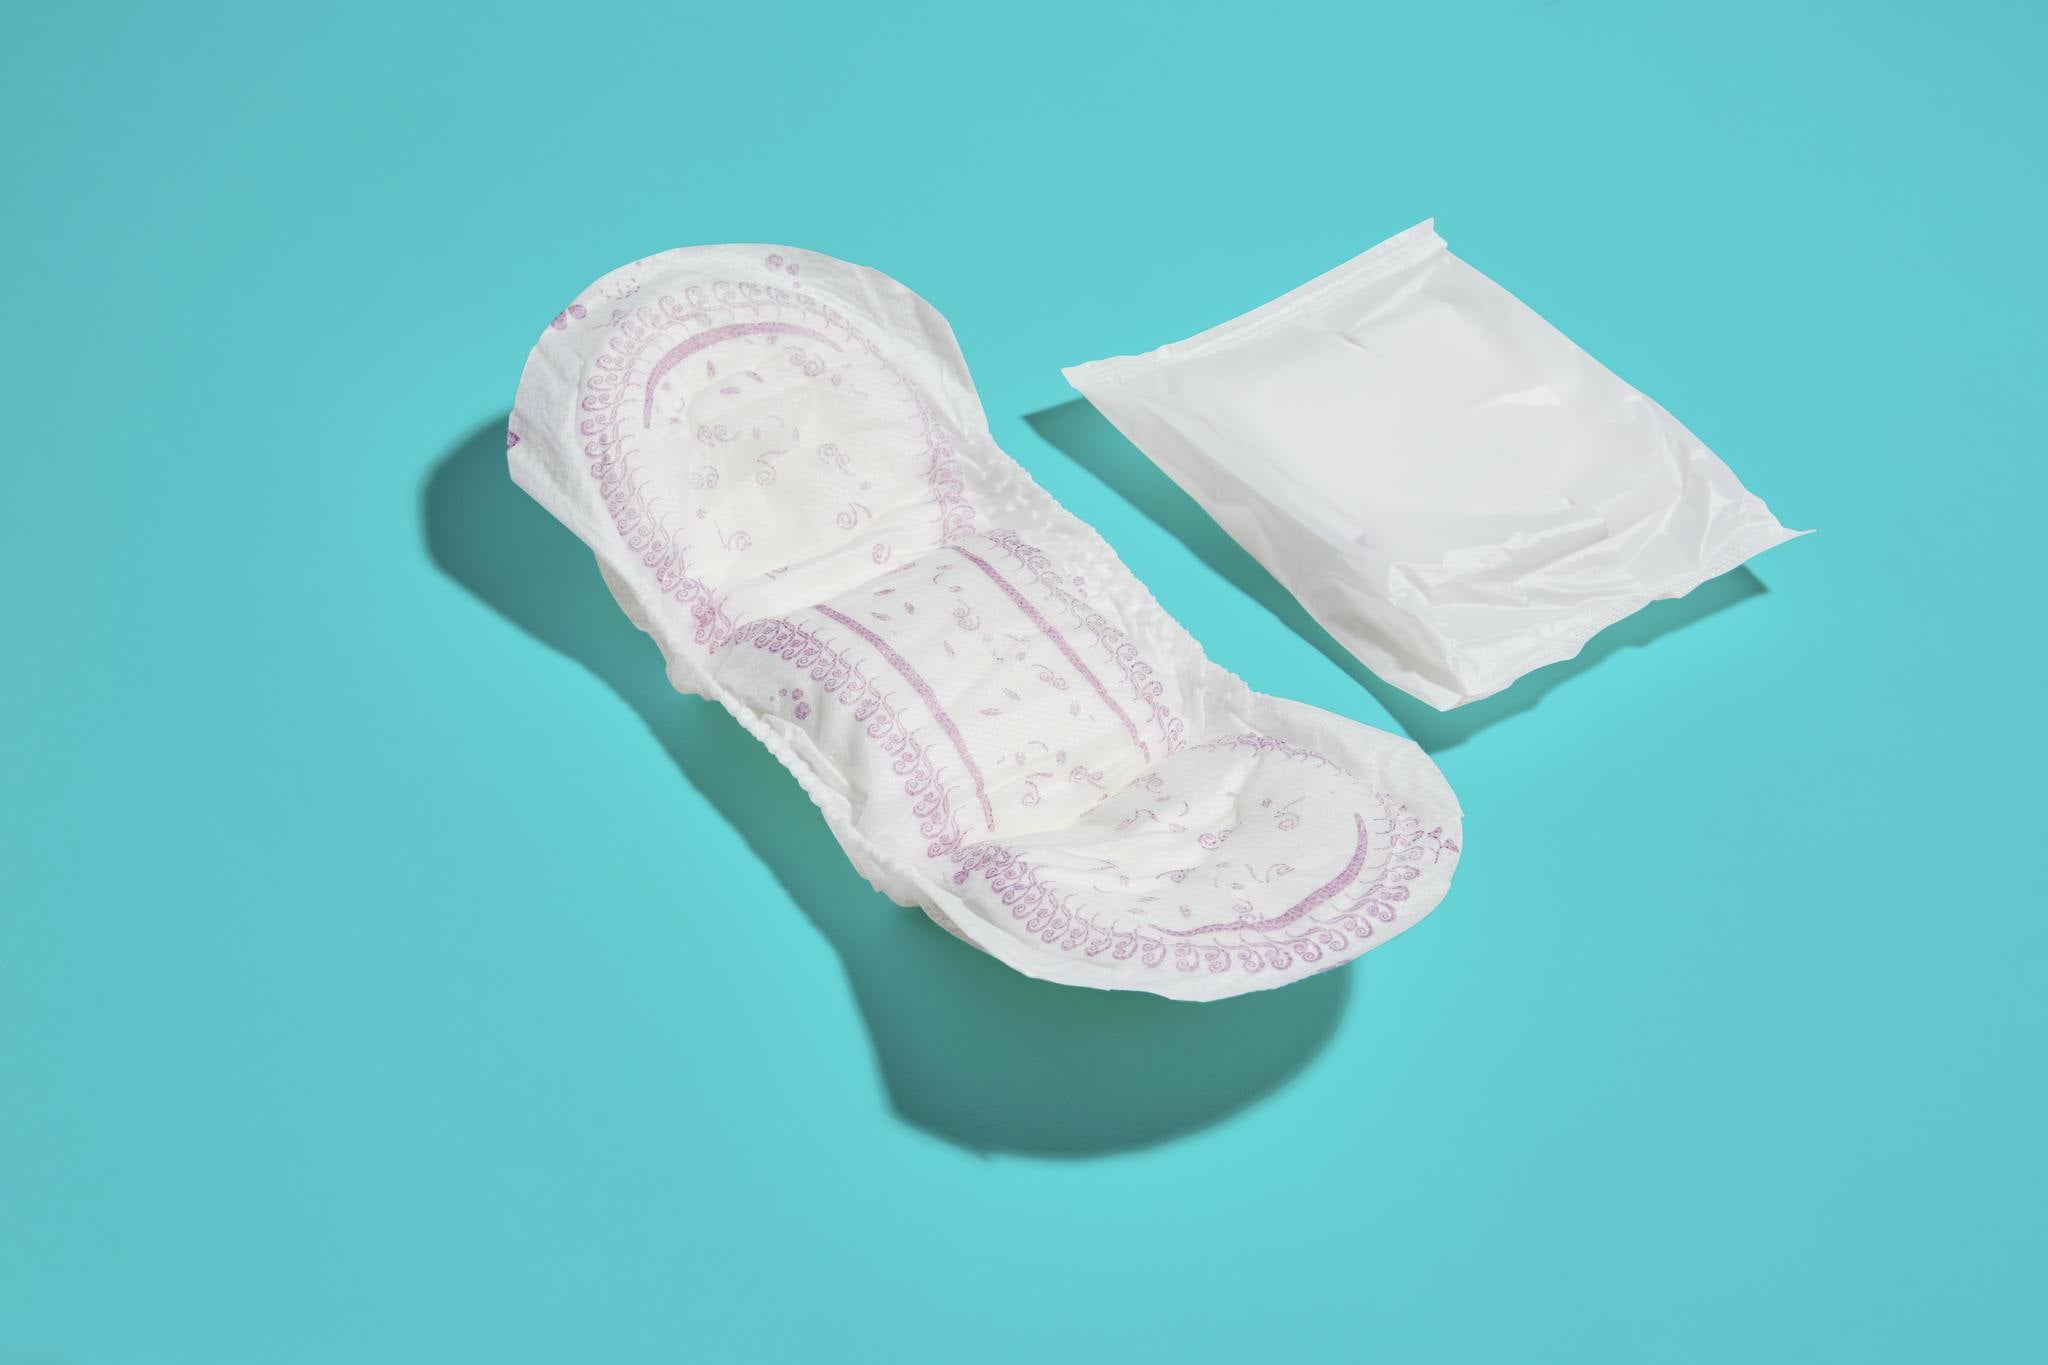 4 Ways to Apply Incontinence Pads - wikiHow